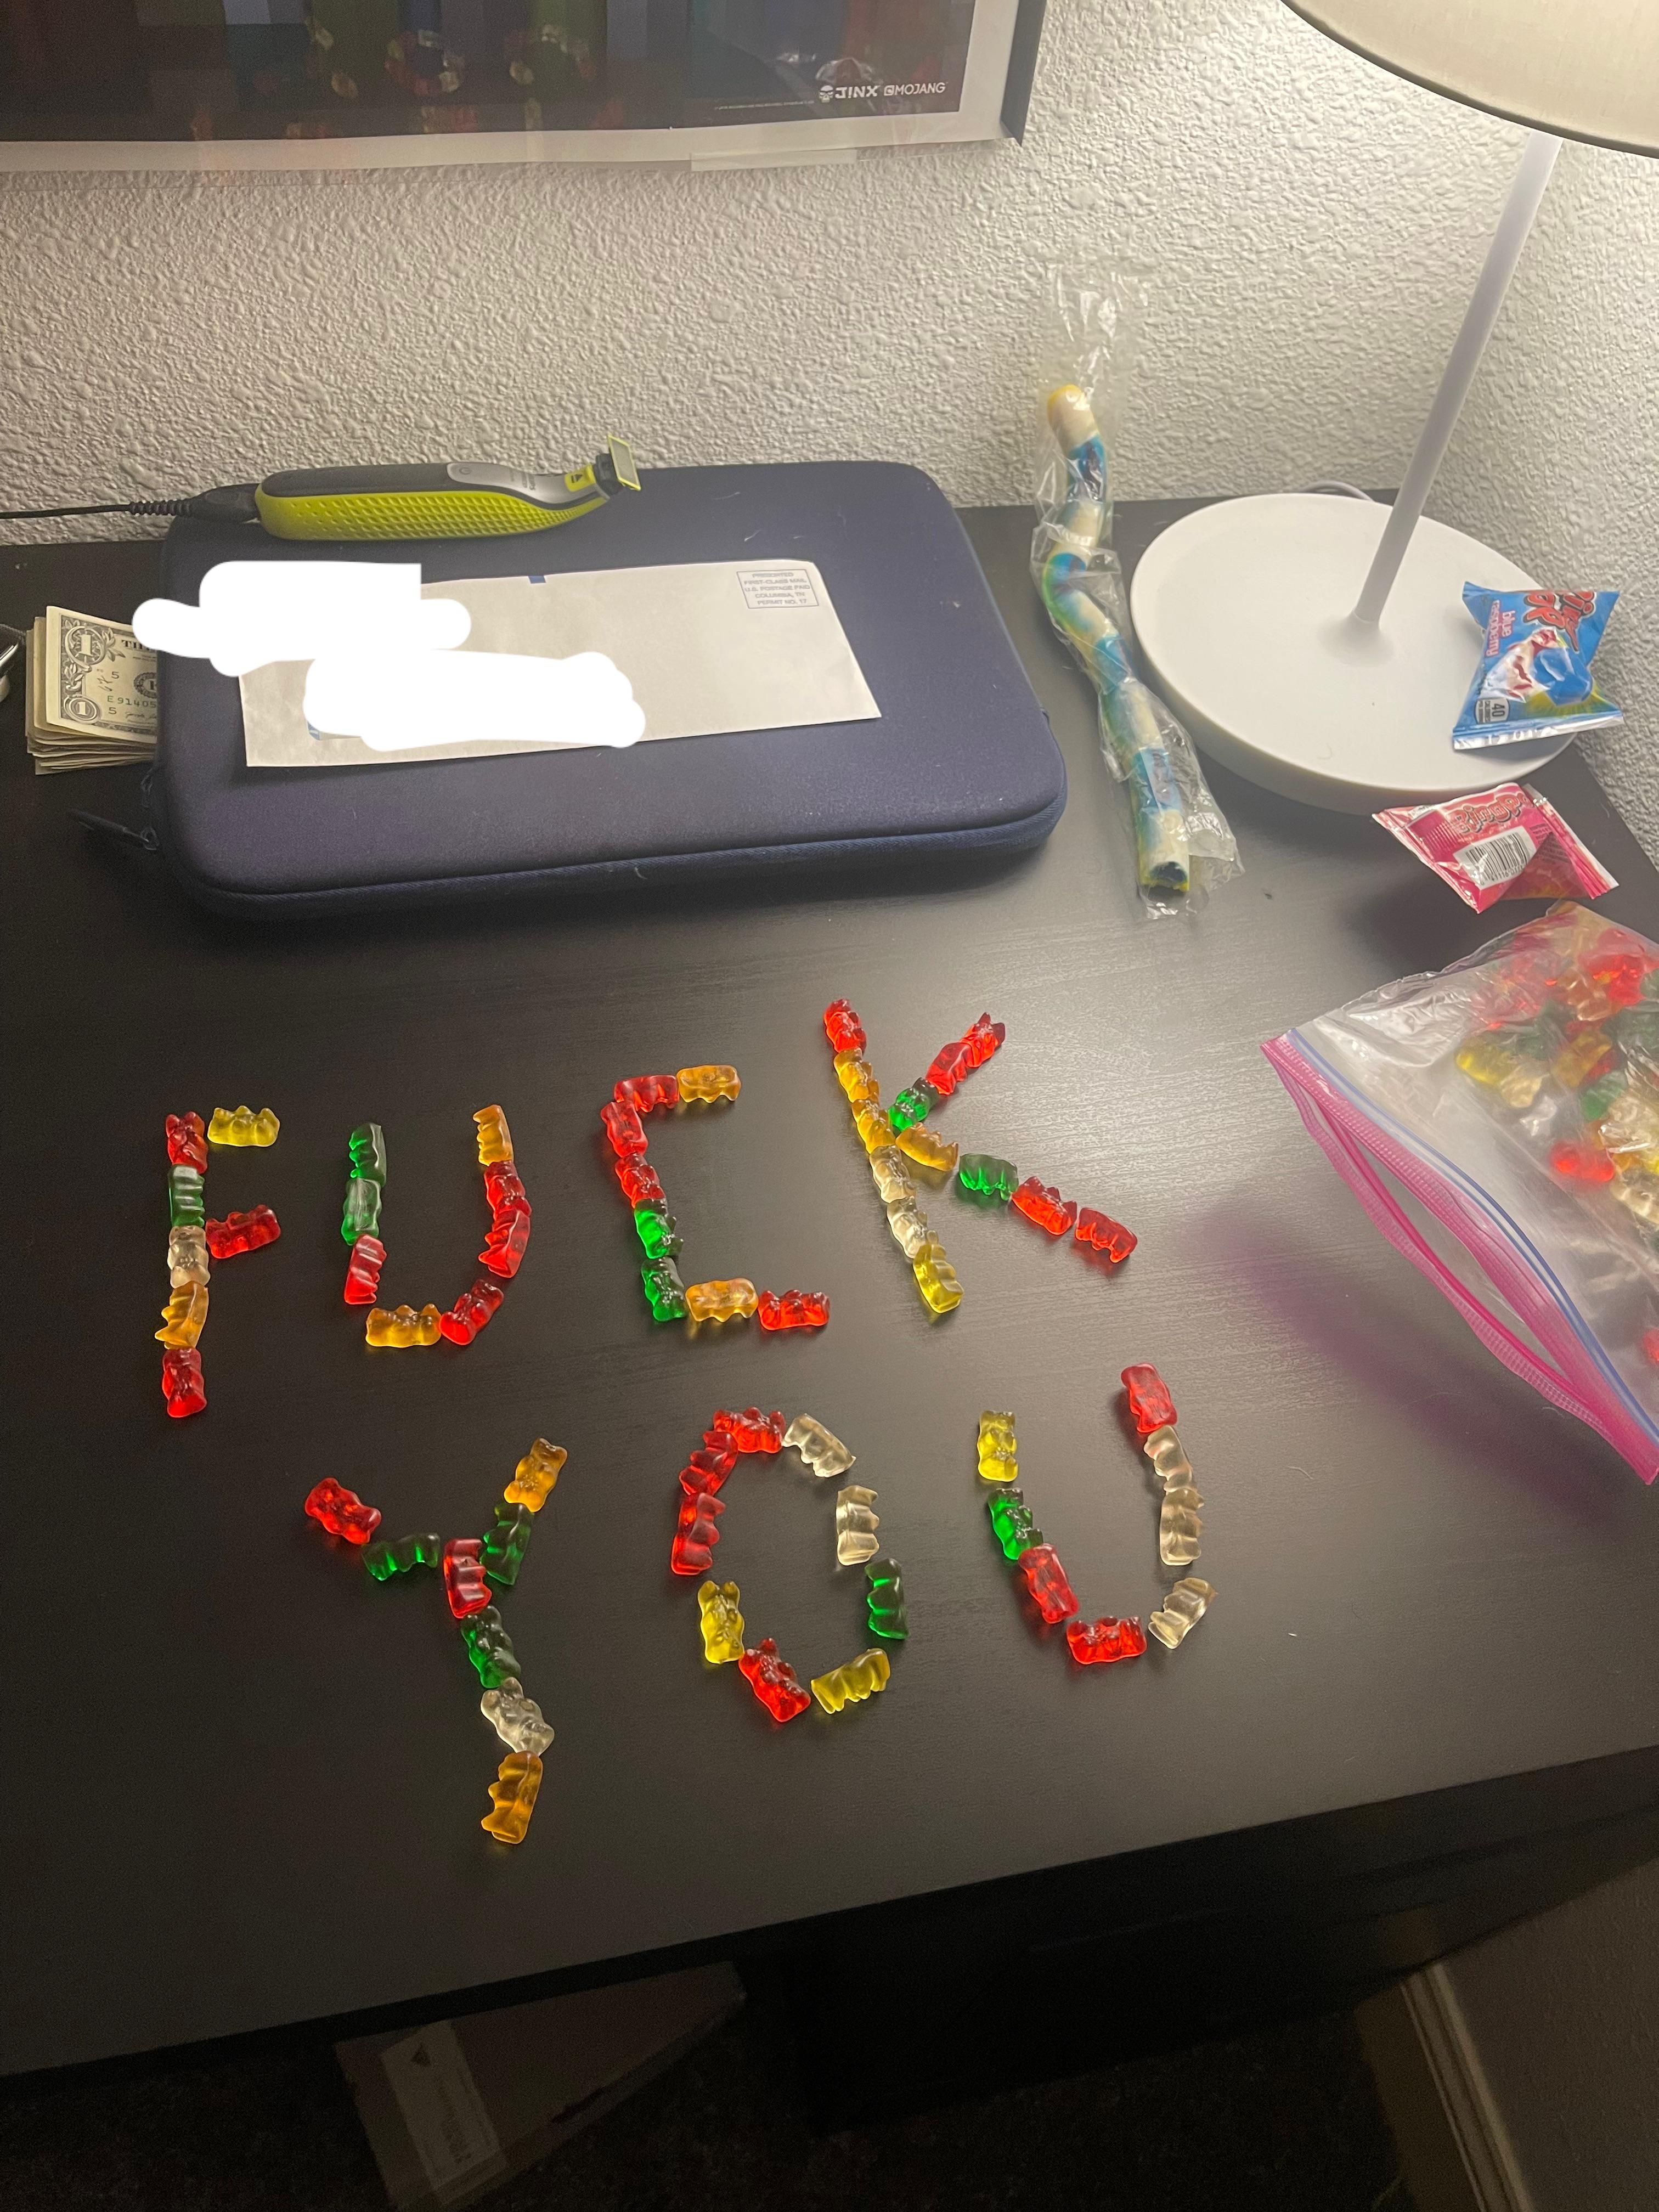 Walked in my room and saw my brother left me a message with my gummy bears